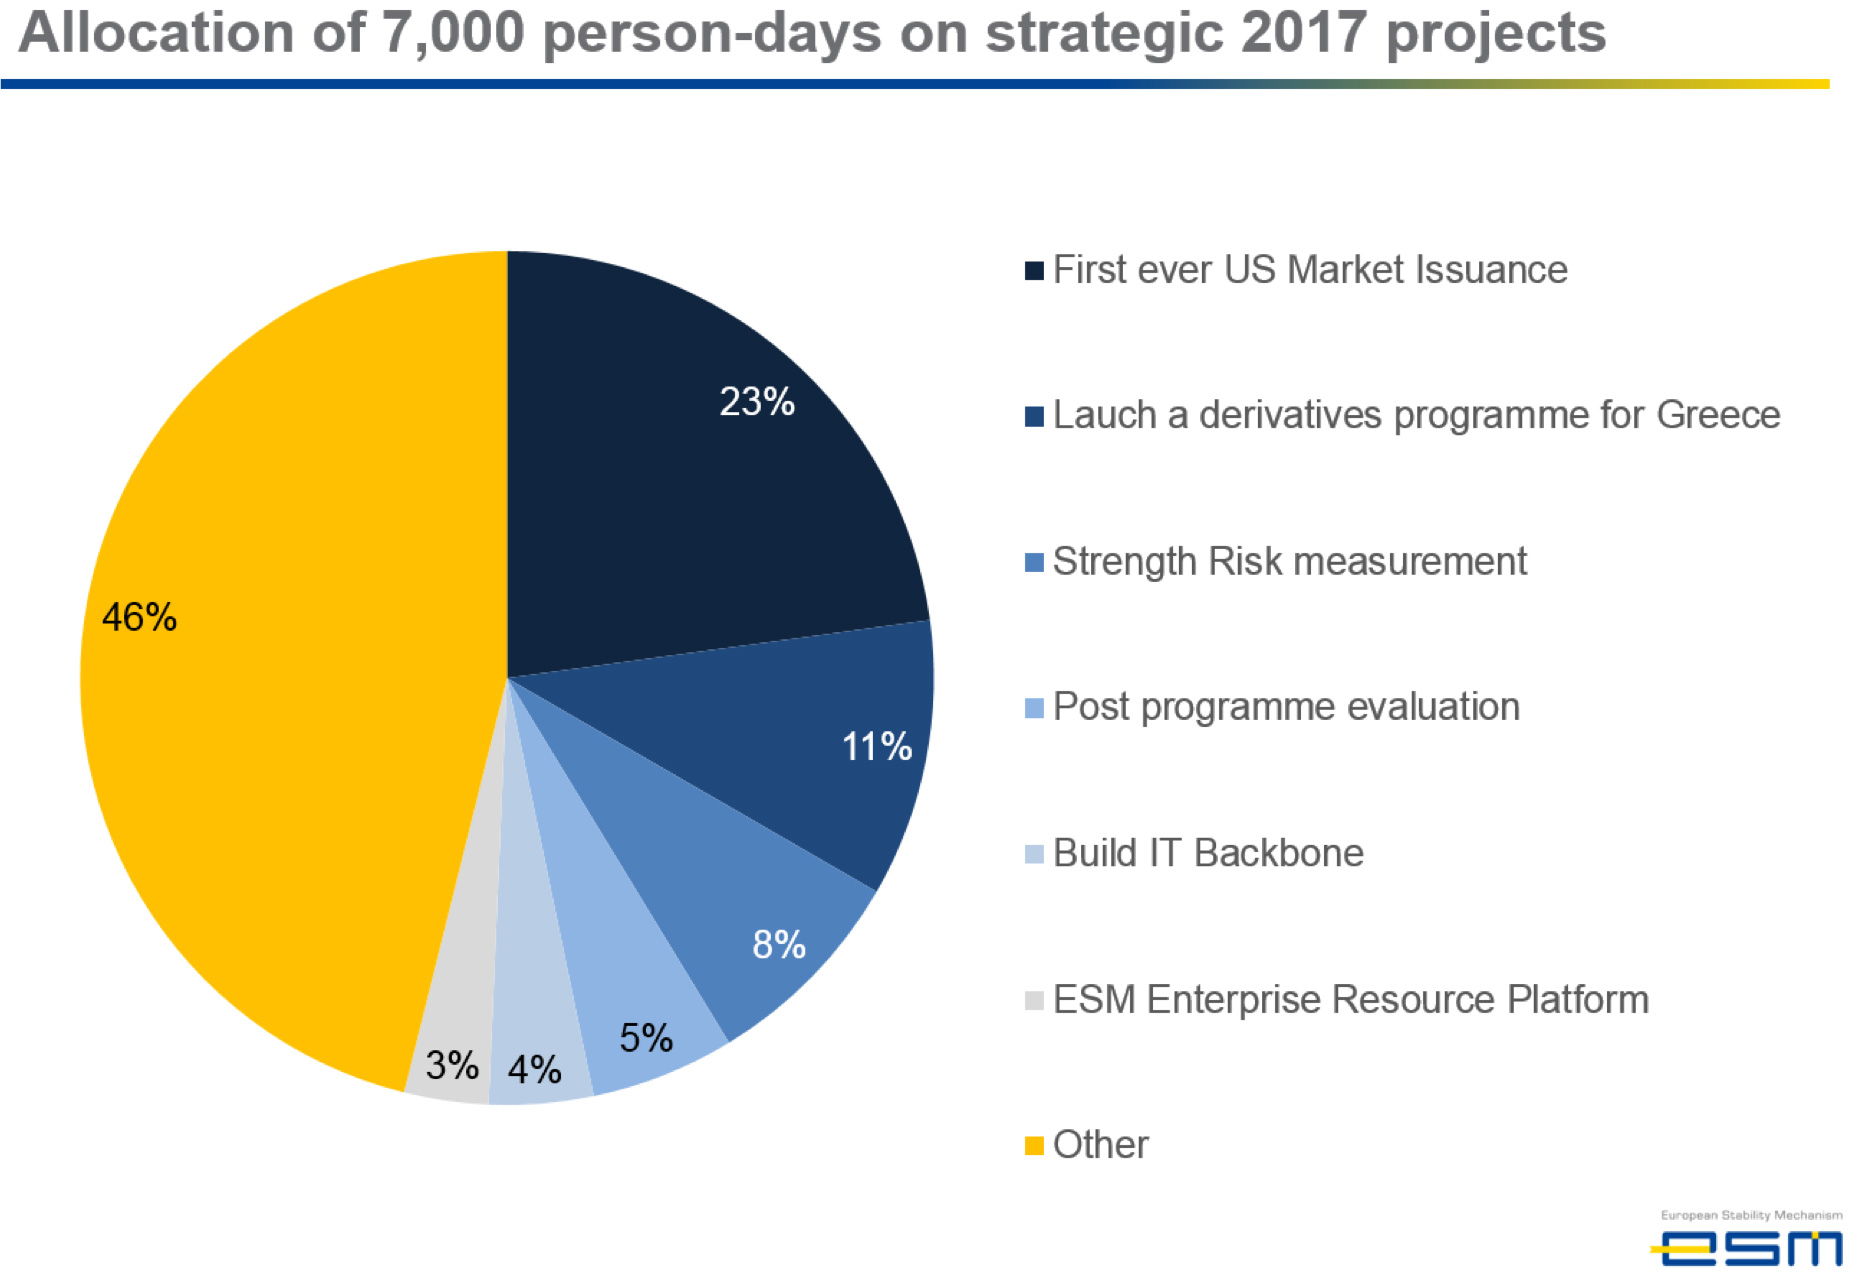 Allocation of 7,000 person-days on strategic 2017 projects